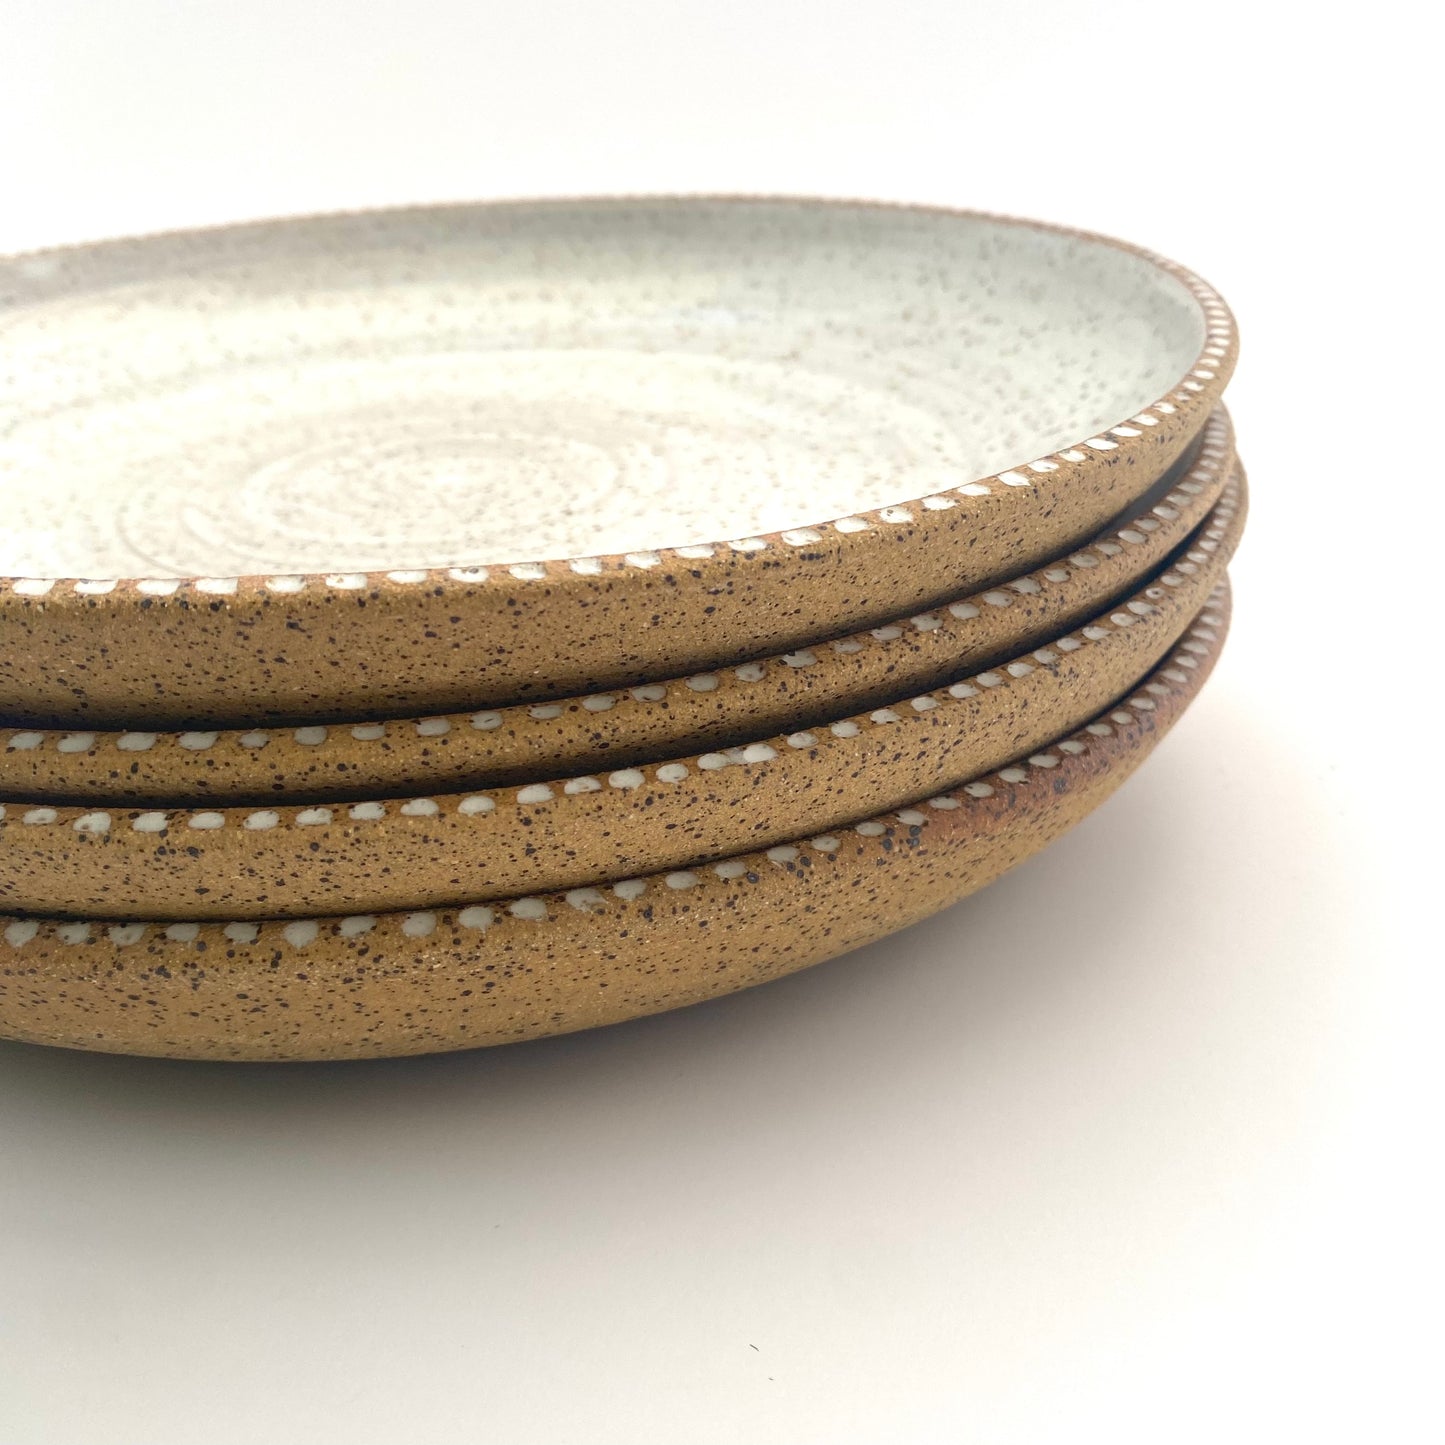 Speckled Wide Bowl in White